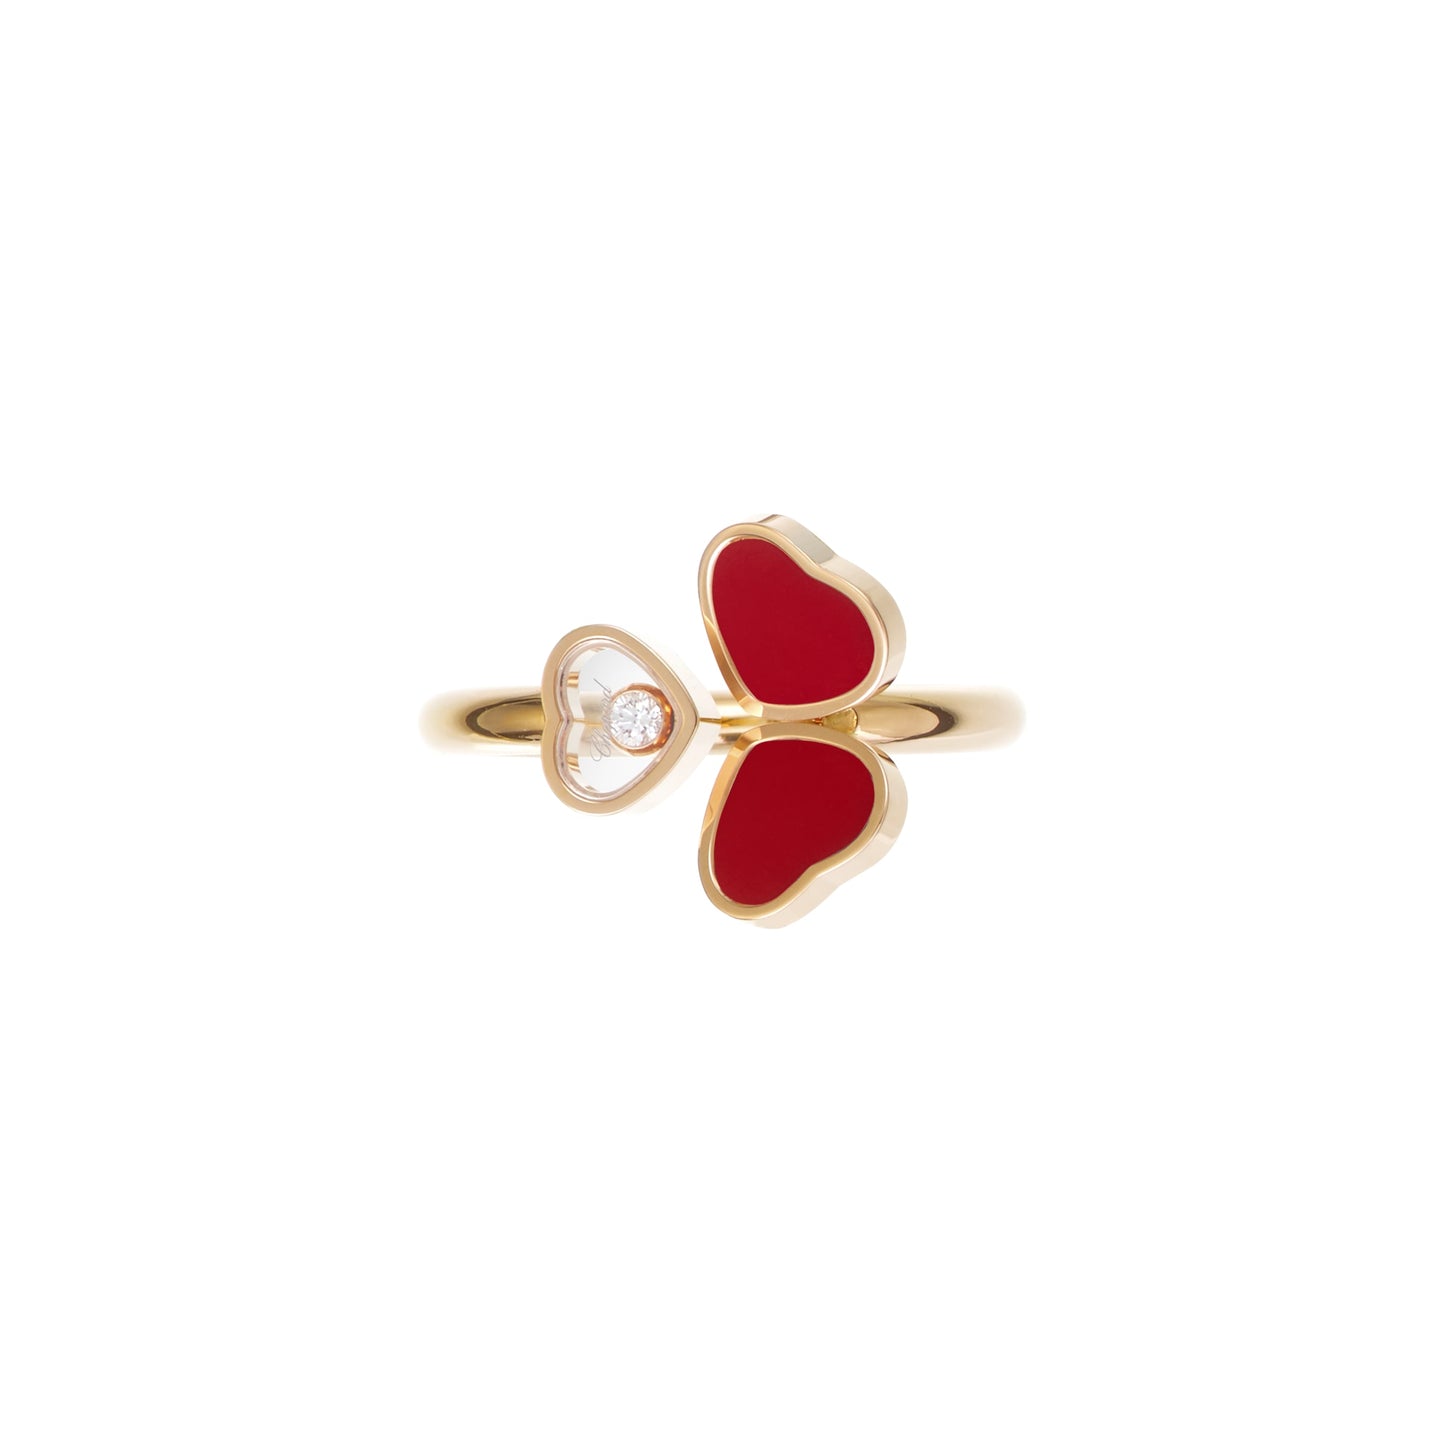 HAPPY HEARTS WINGS RING, ETHICAL ROSE GOLD, DIAMOND, RED STONE 82A083-5800